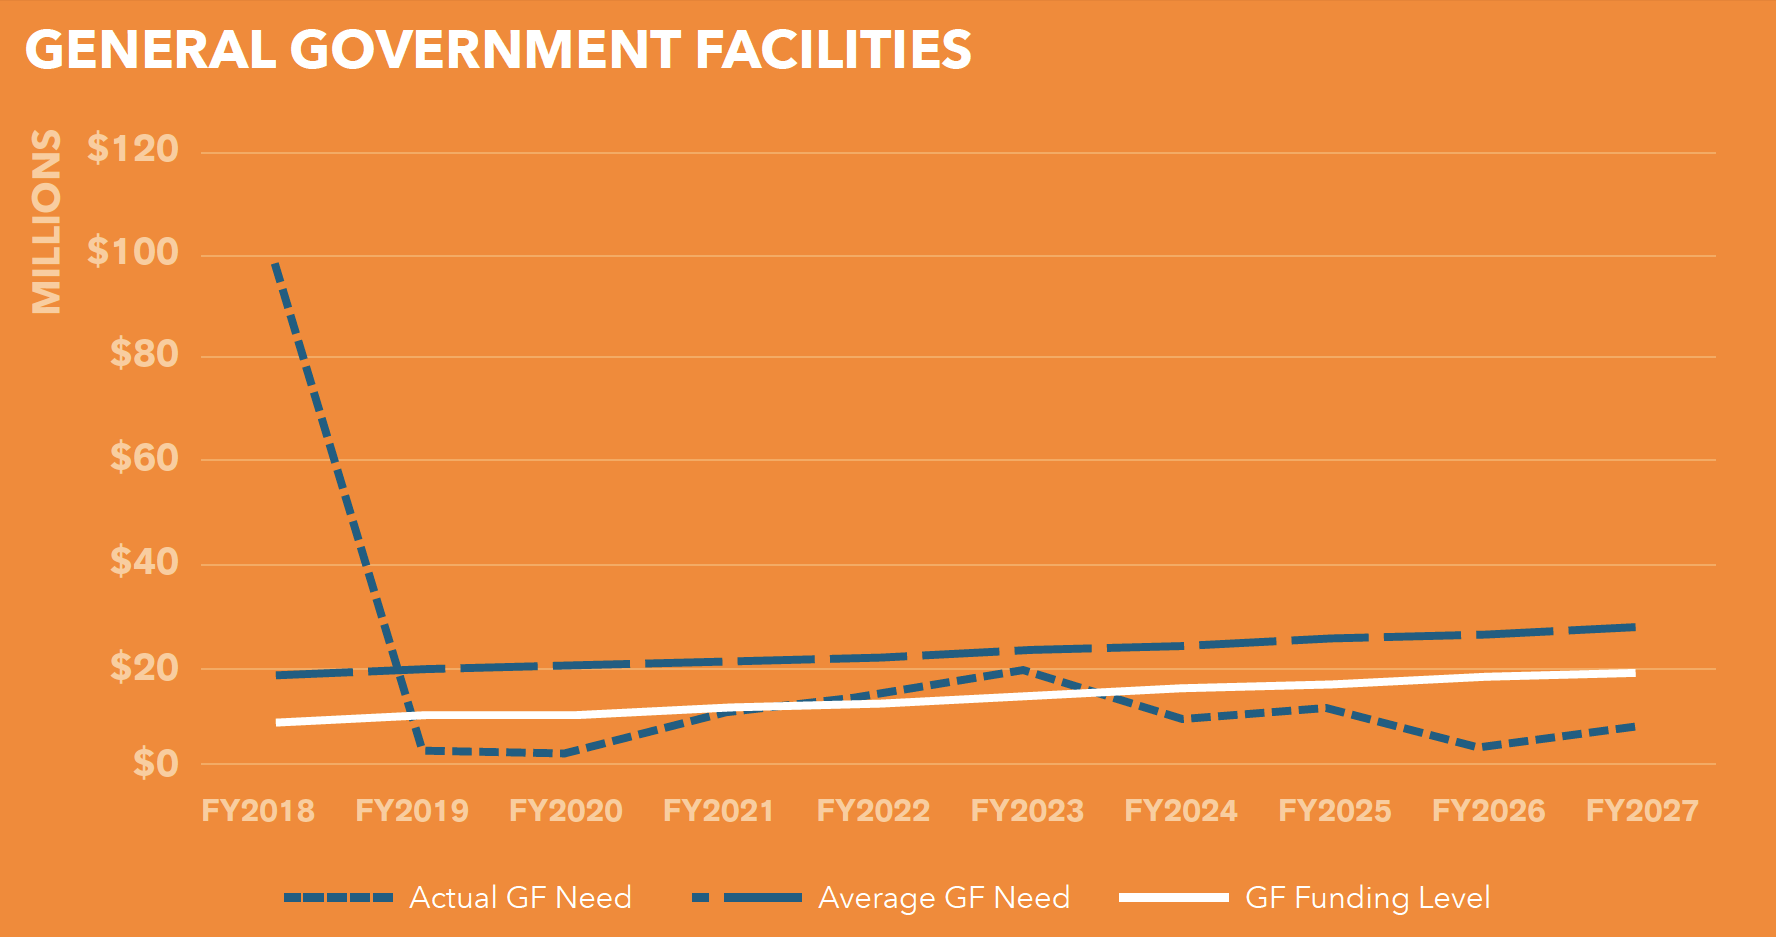 Chart 7.1 - General Government Facilities